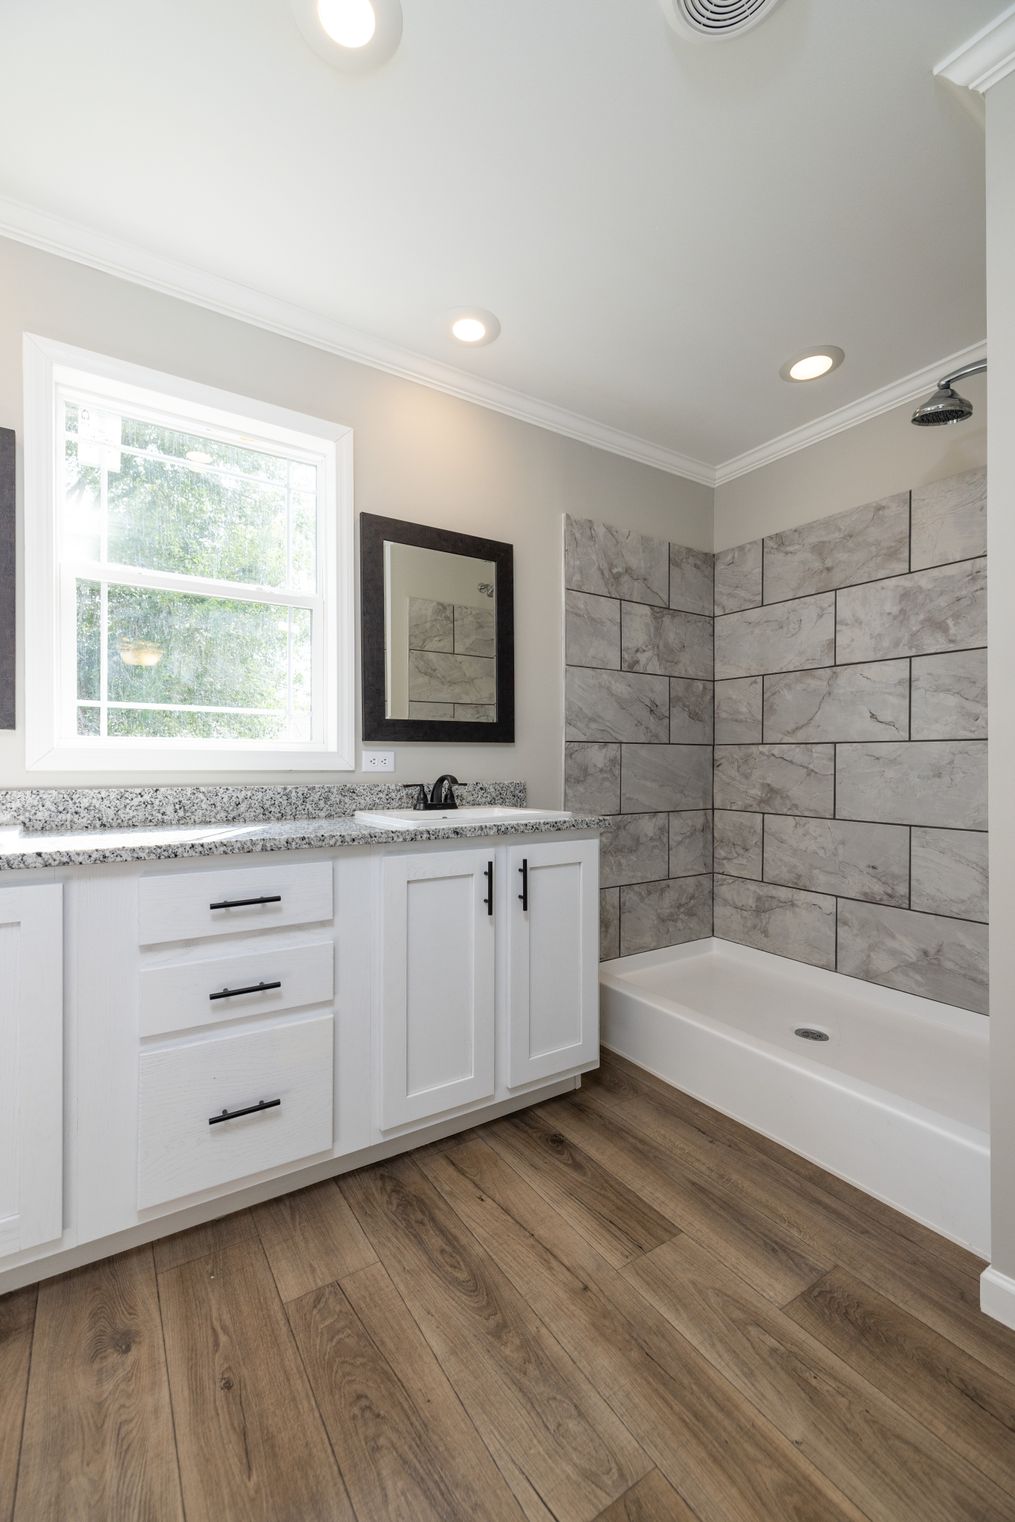 The HAWTHORNE Master Bathroom. This Manufactured Mobile Home features 3 bedrooms and 2 baths.